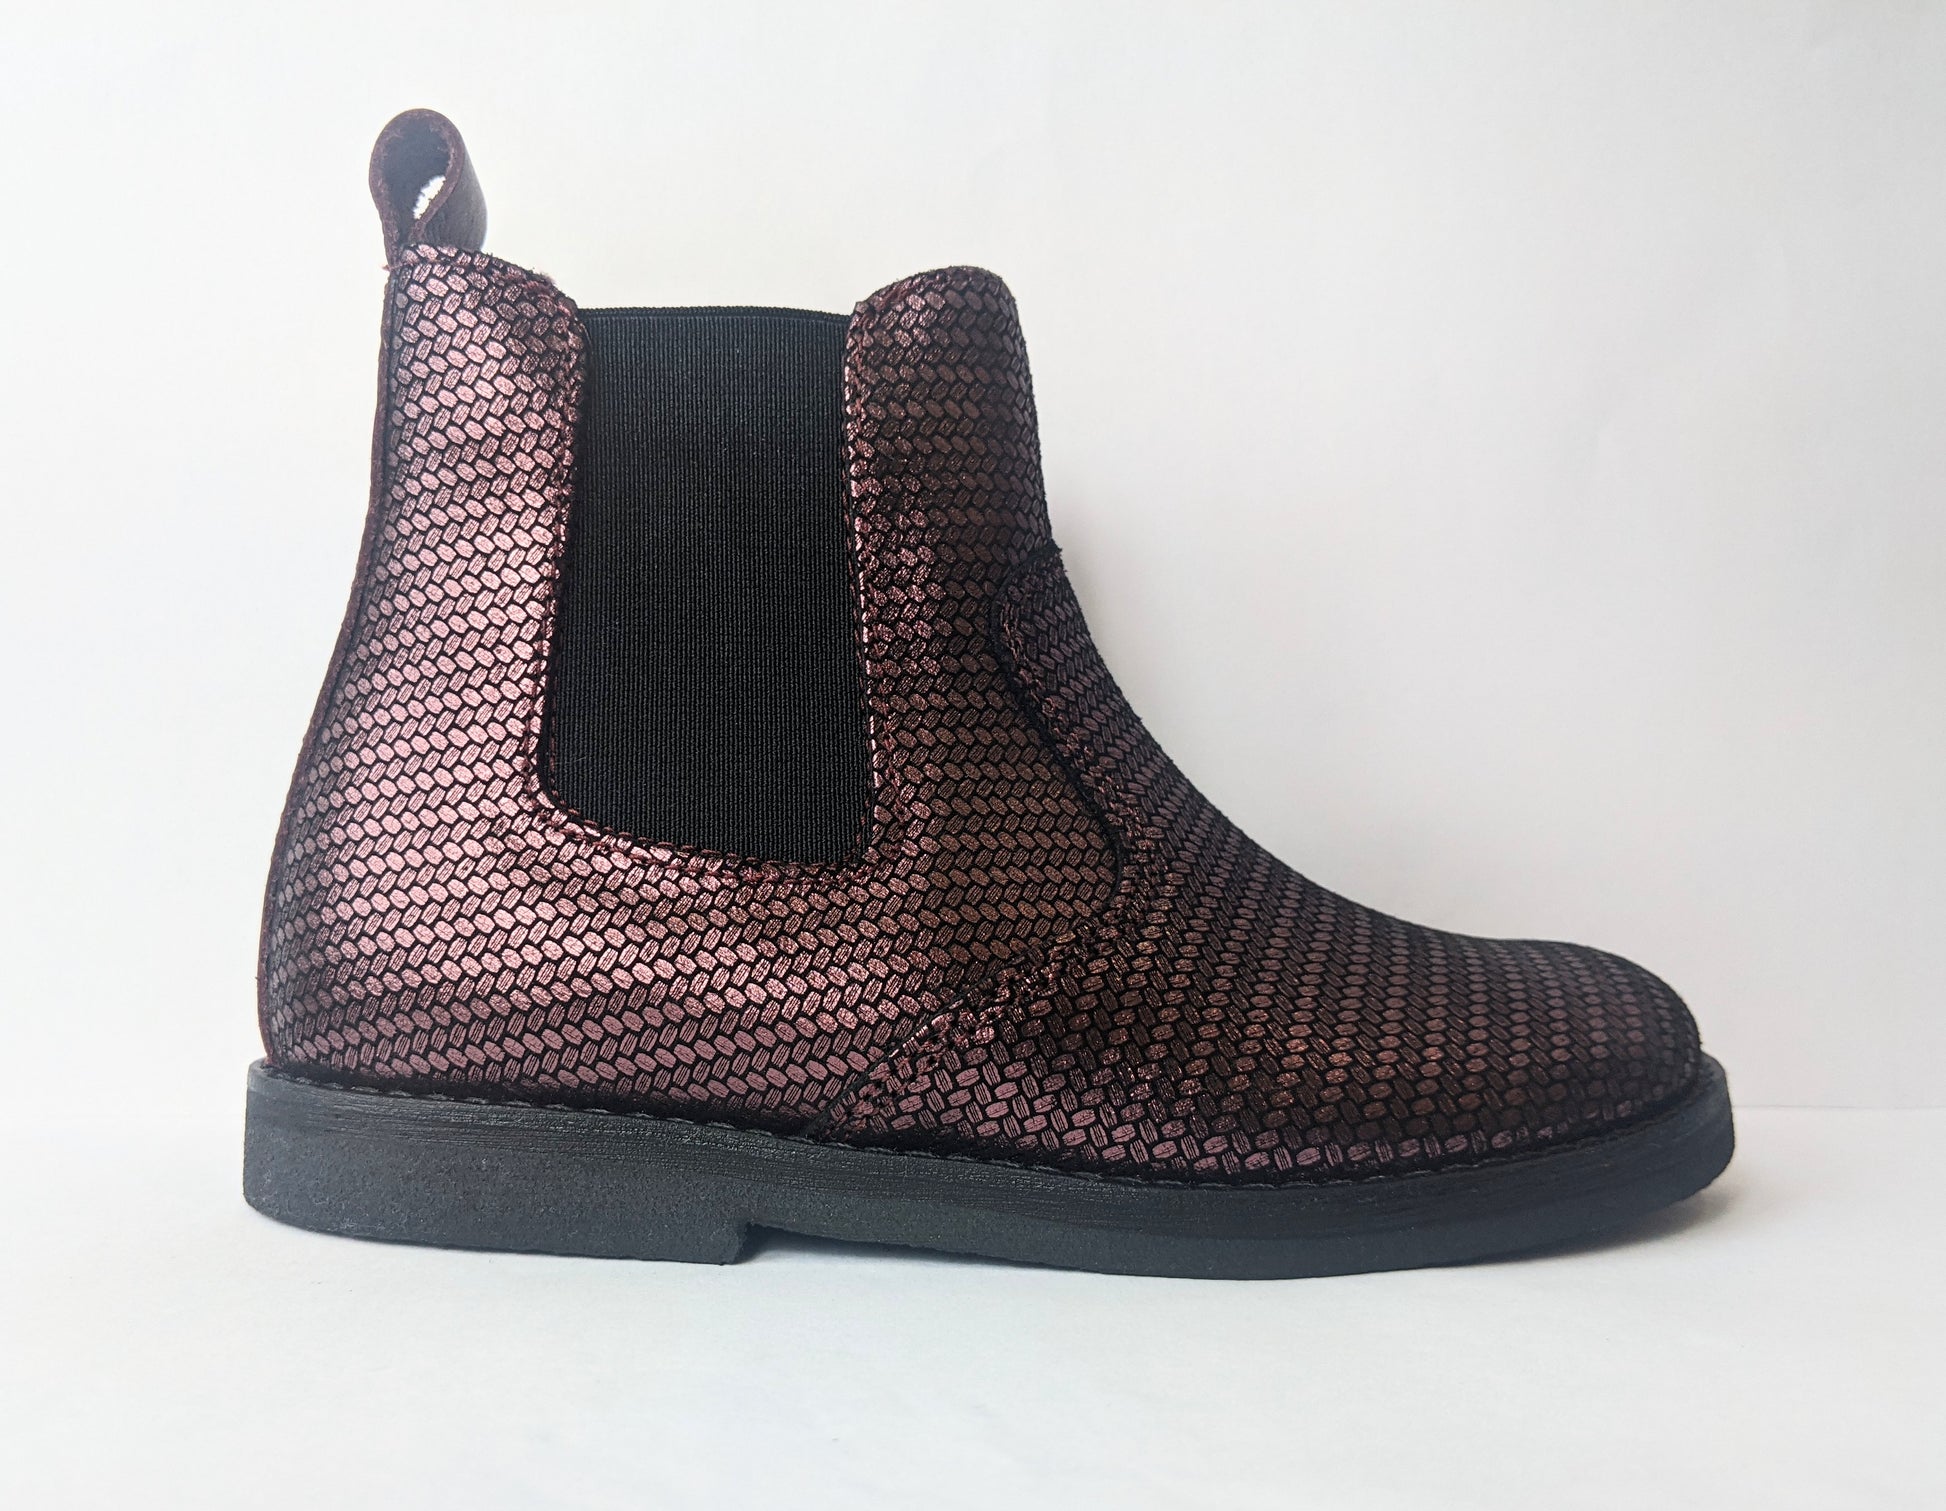 A girls chelsea boot Froddo, style Chelys G3160081-6 in metallic burgundy leather with zip fastening. Right side view.